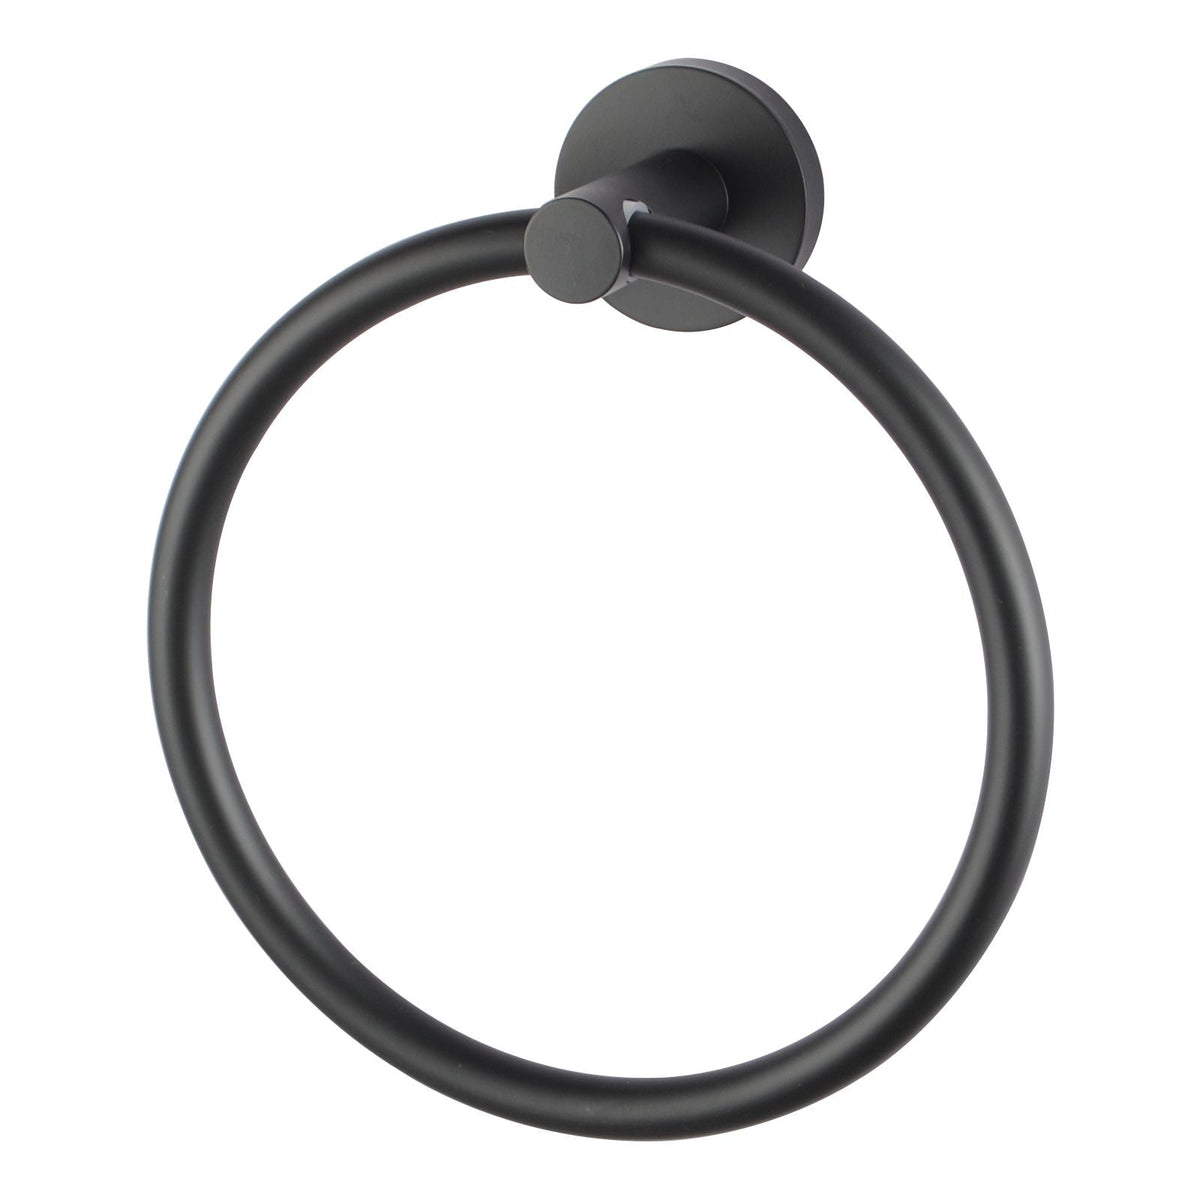 LUCID PIN Round Black Hand Towel Ring